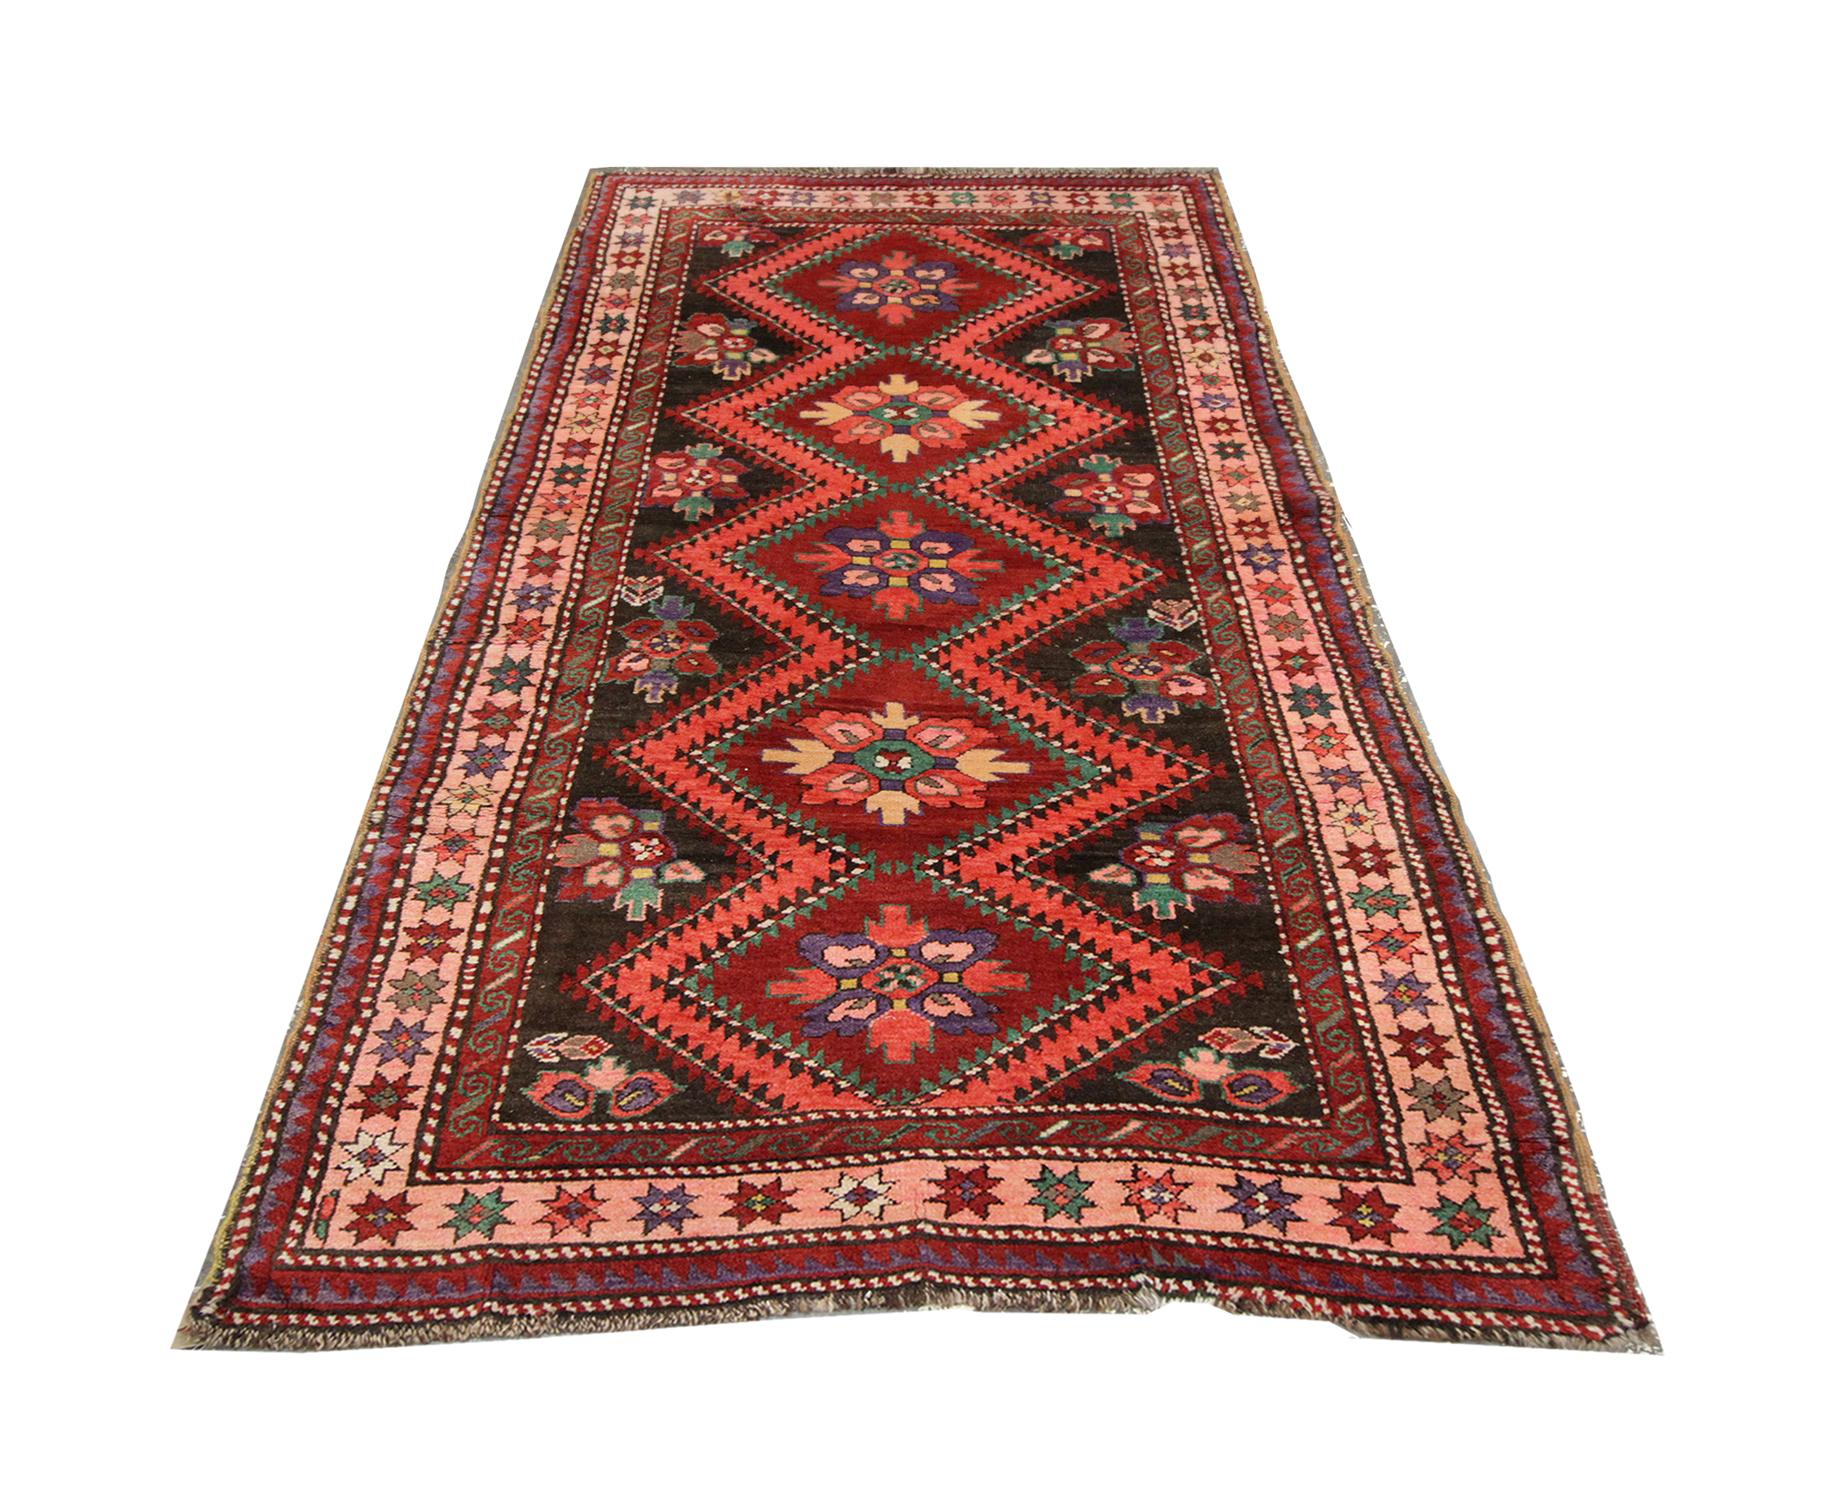 Handmade carpet Oriental rug pairing deep tones of orange and red this stunning antique rug has been handwoven to perfection. The centrepiece is a beautiful diamond, repeat pattern on a deep red background, the contrast in colors works beautifully